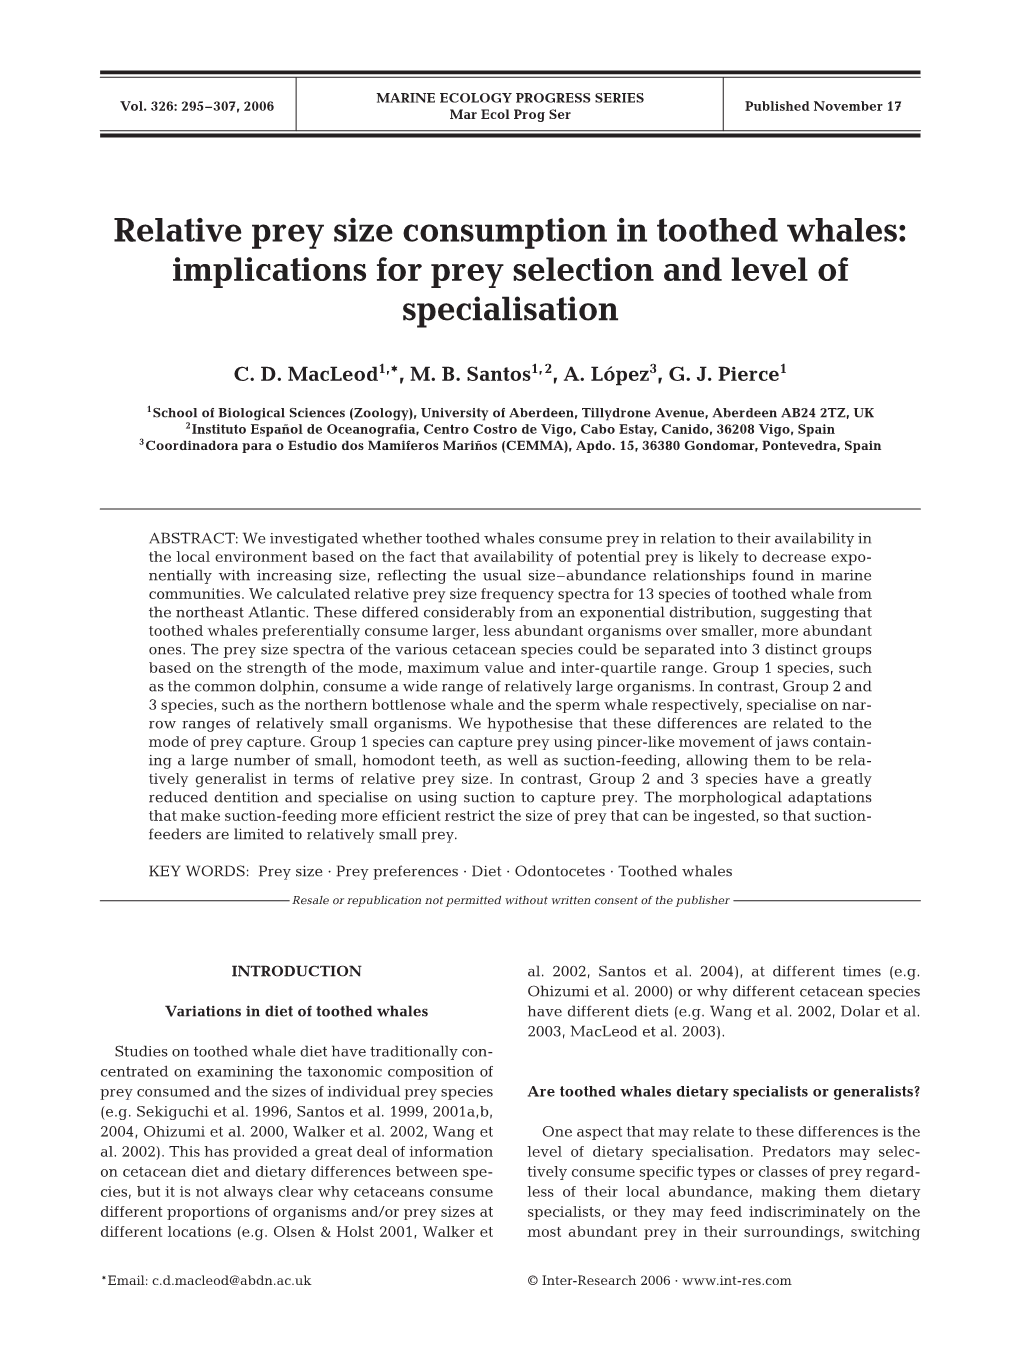 Relative Prey Size Consumption in Toothed Whales: Implications for Prey Selection and Level of Specialisation